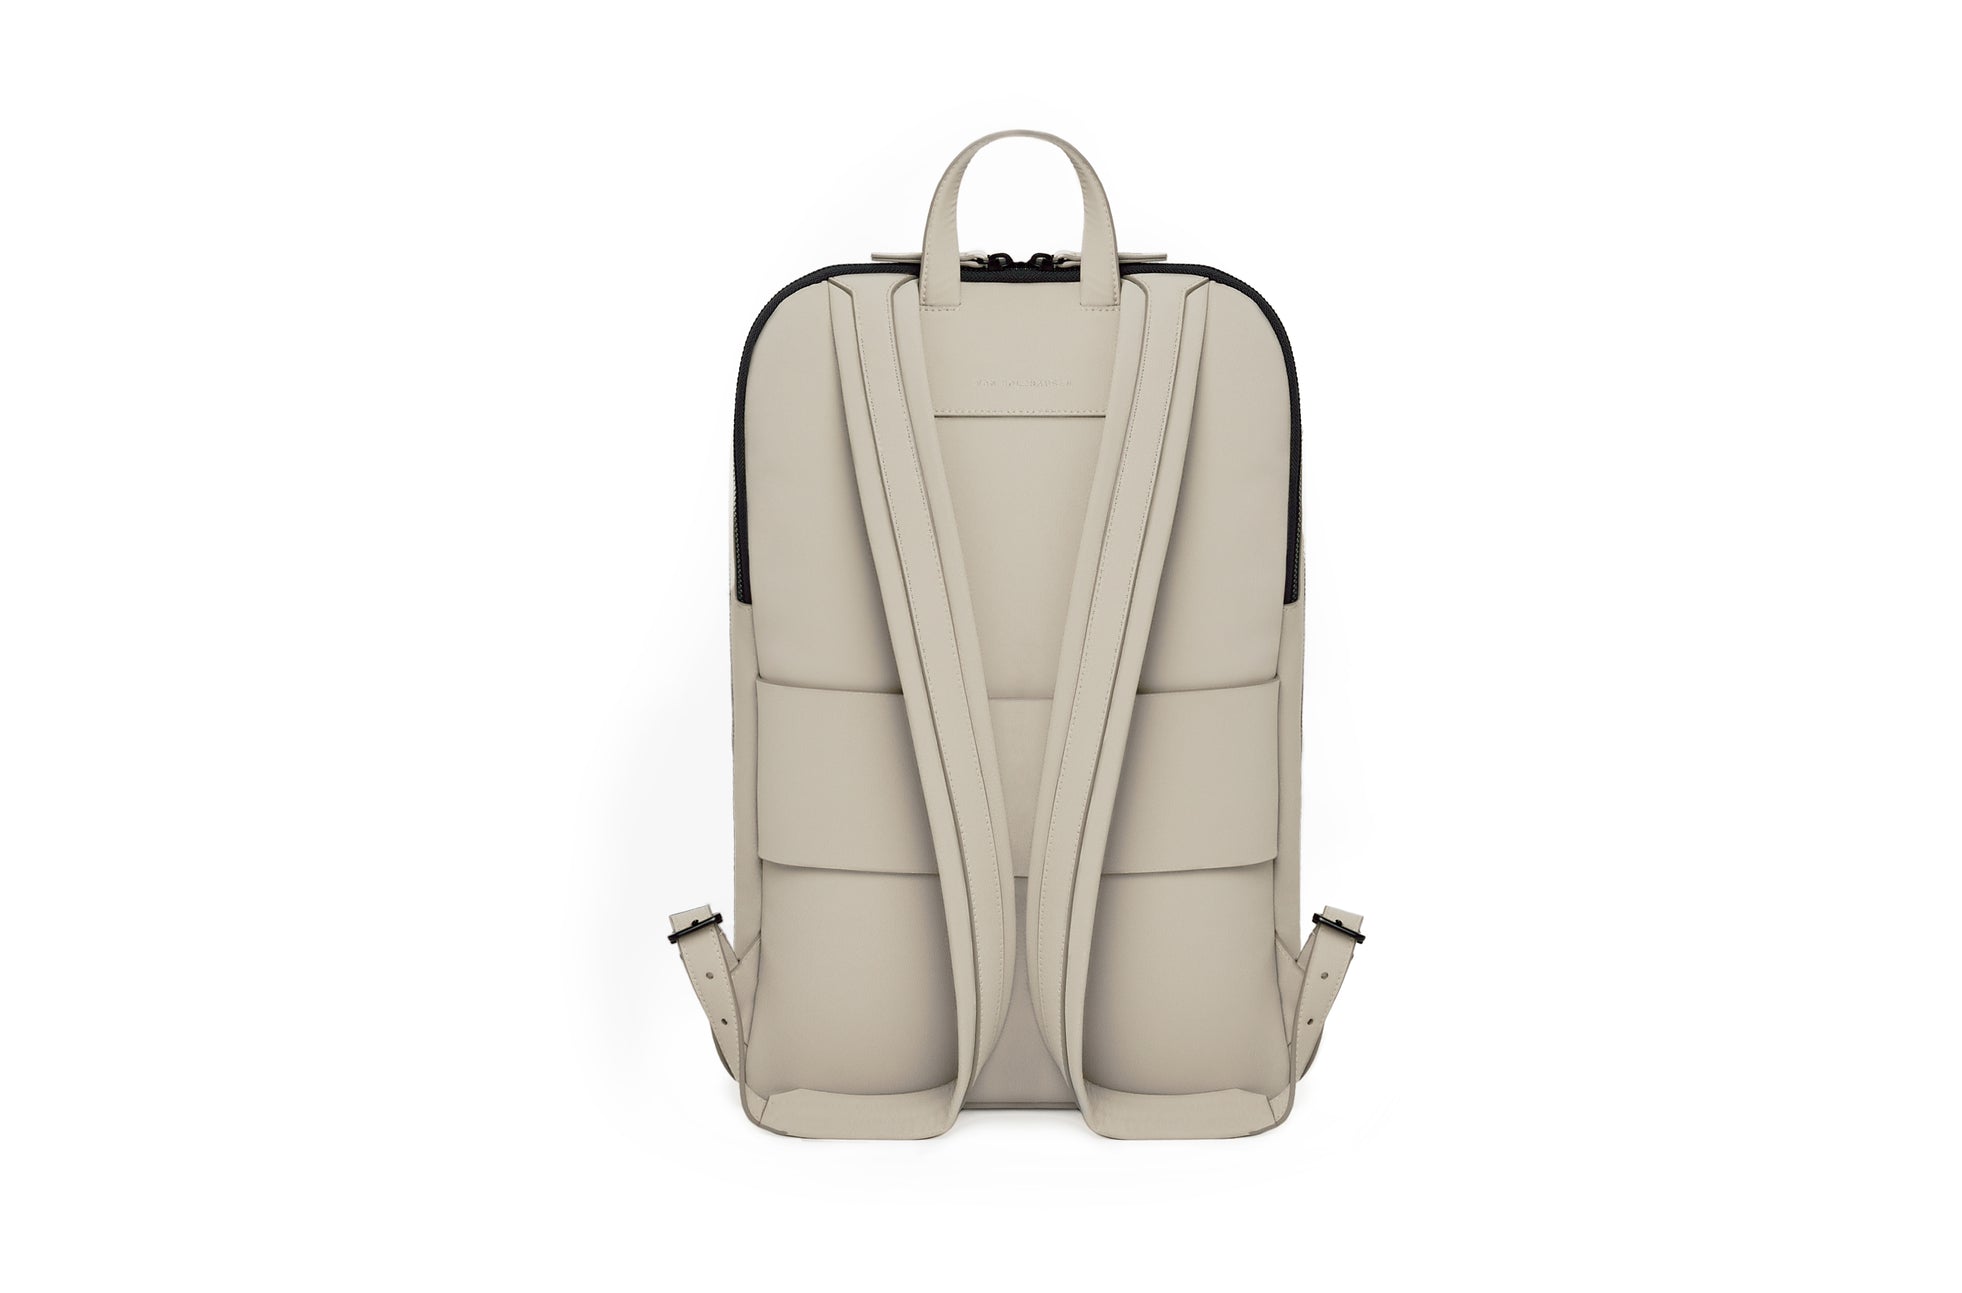 The Tech Backpack in Soft Leaf in Soft Leaf in Ash image 2